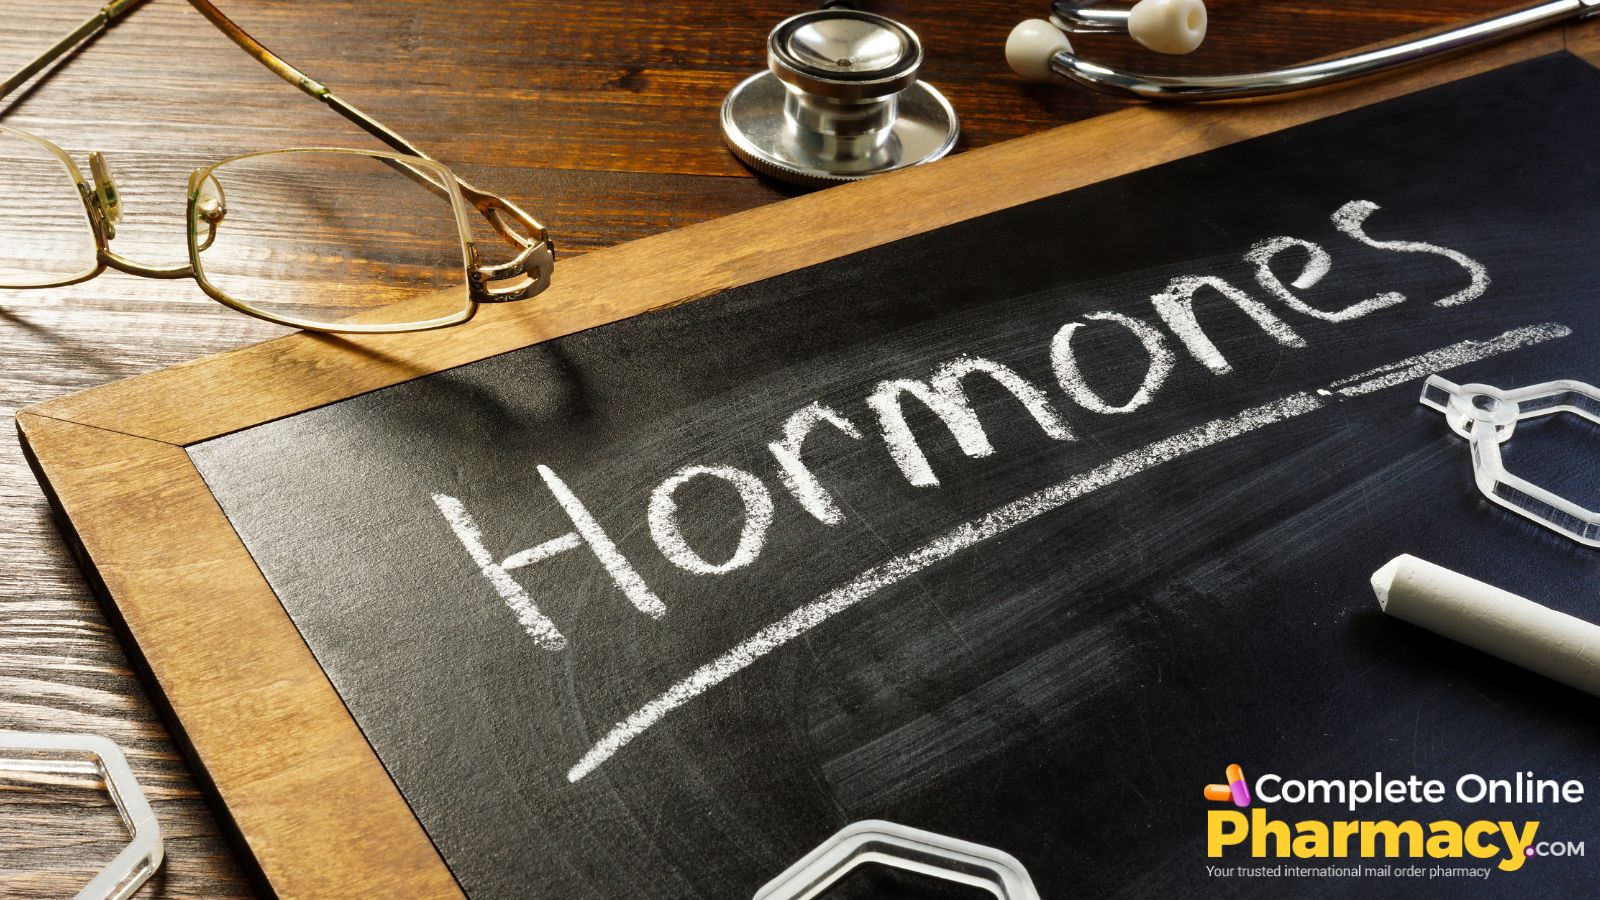 HCG Hormone Imbalance: Signs and How It Affects Your Body